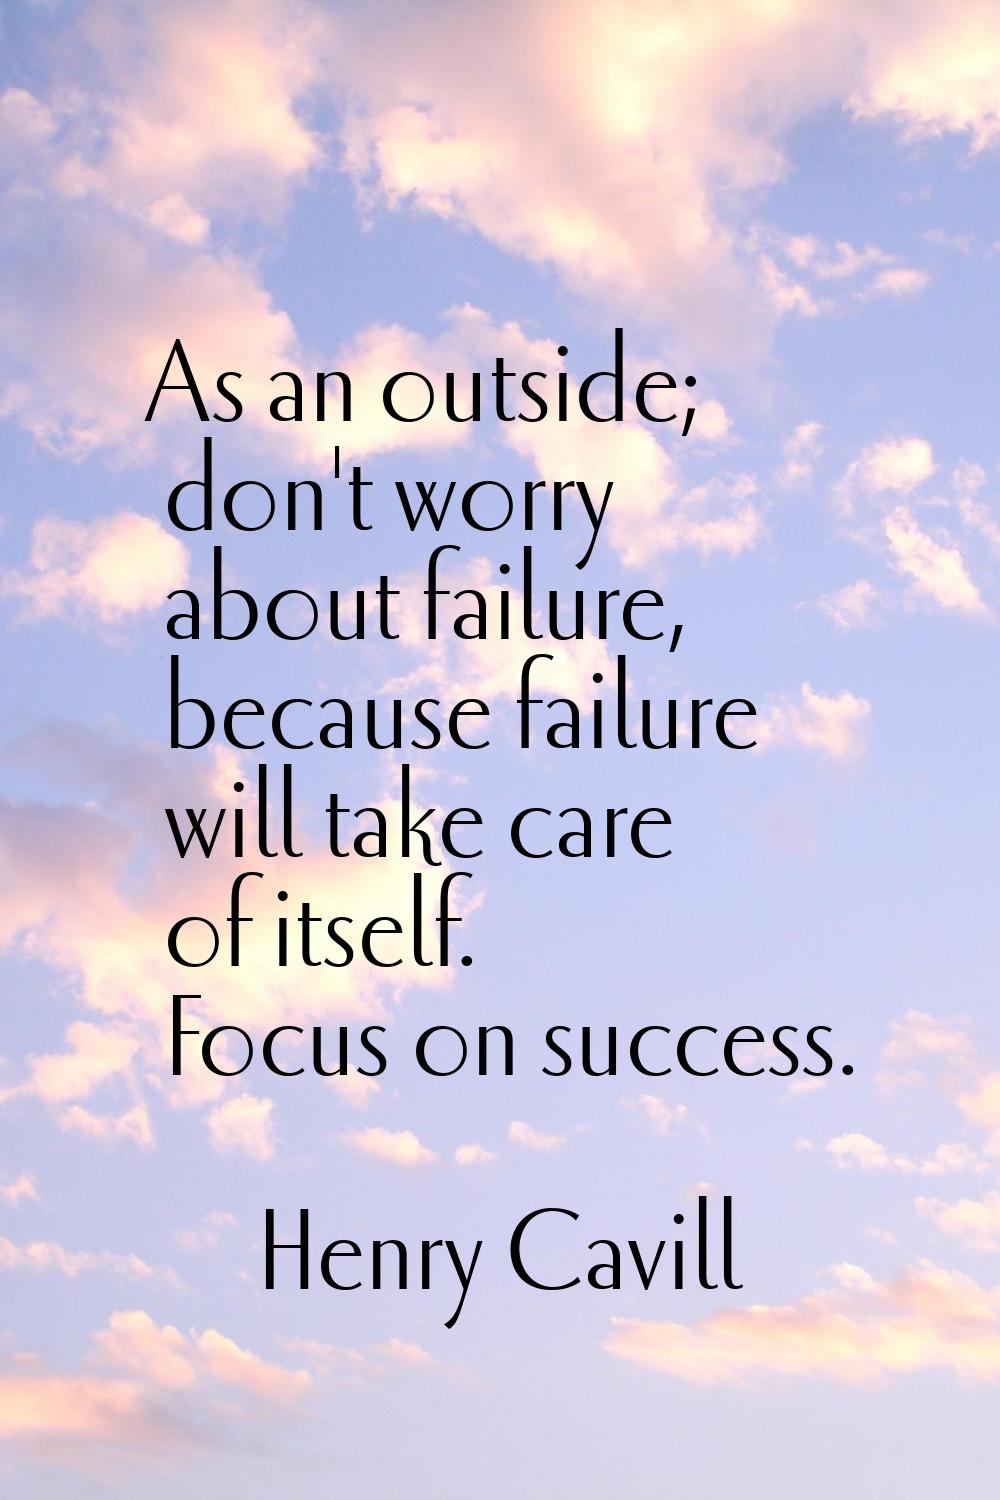 As an outside; don't worry about failure, because failure will take care of itself. Focus on succes